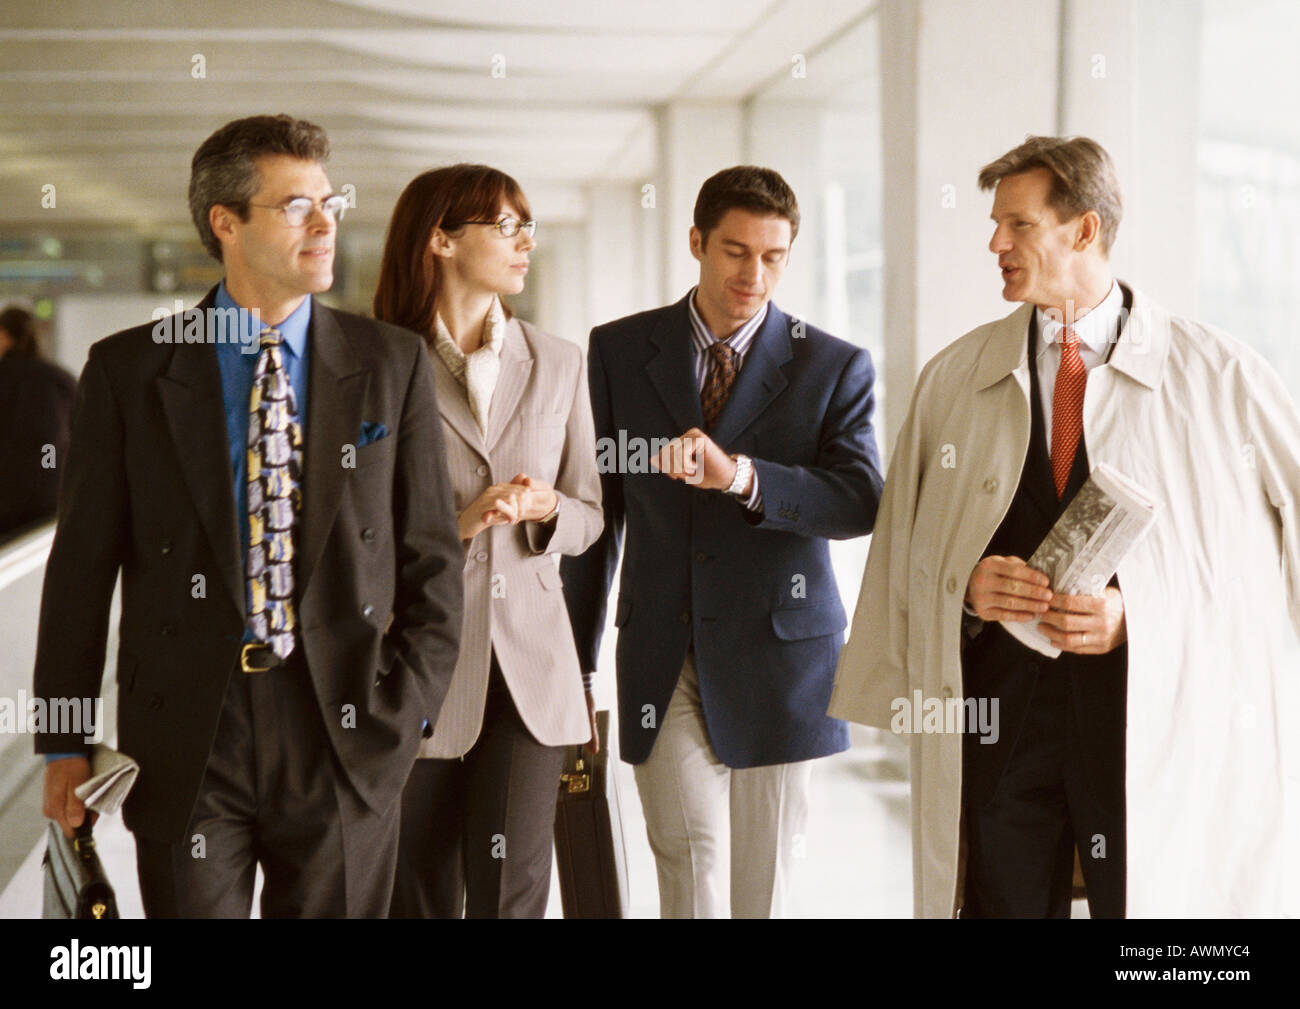 Group of business people walking together indoors, front view Stock Photo